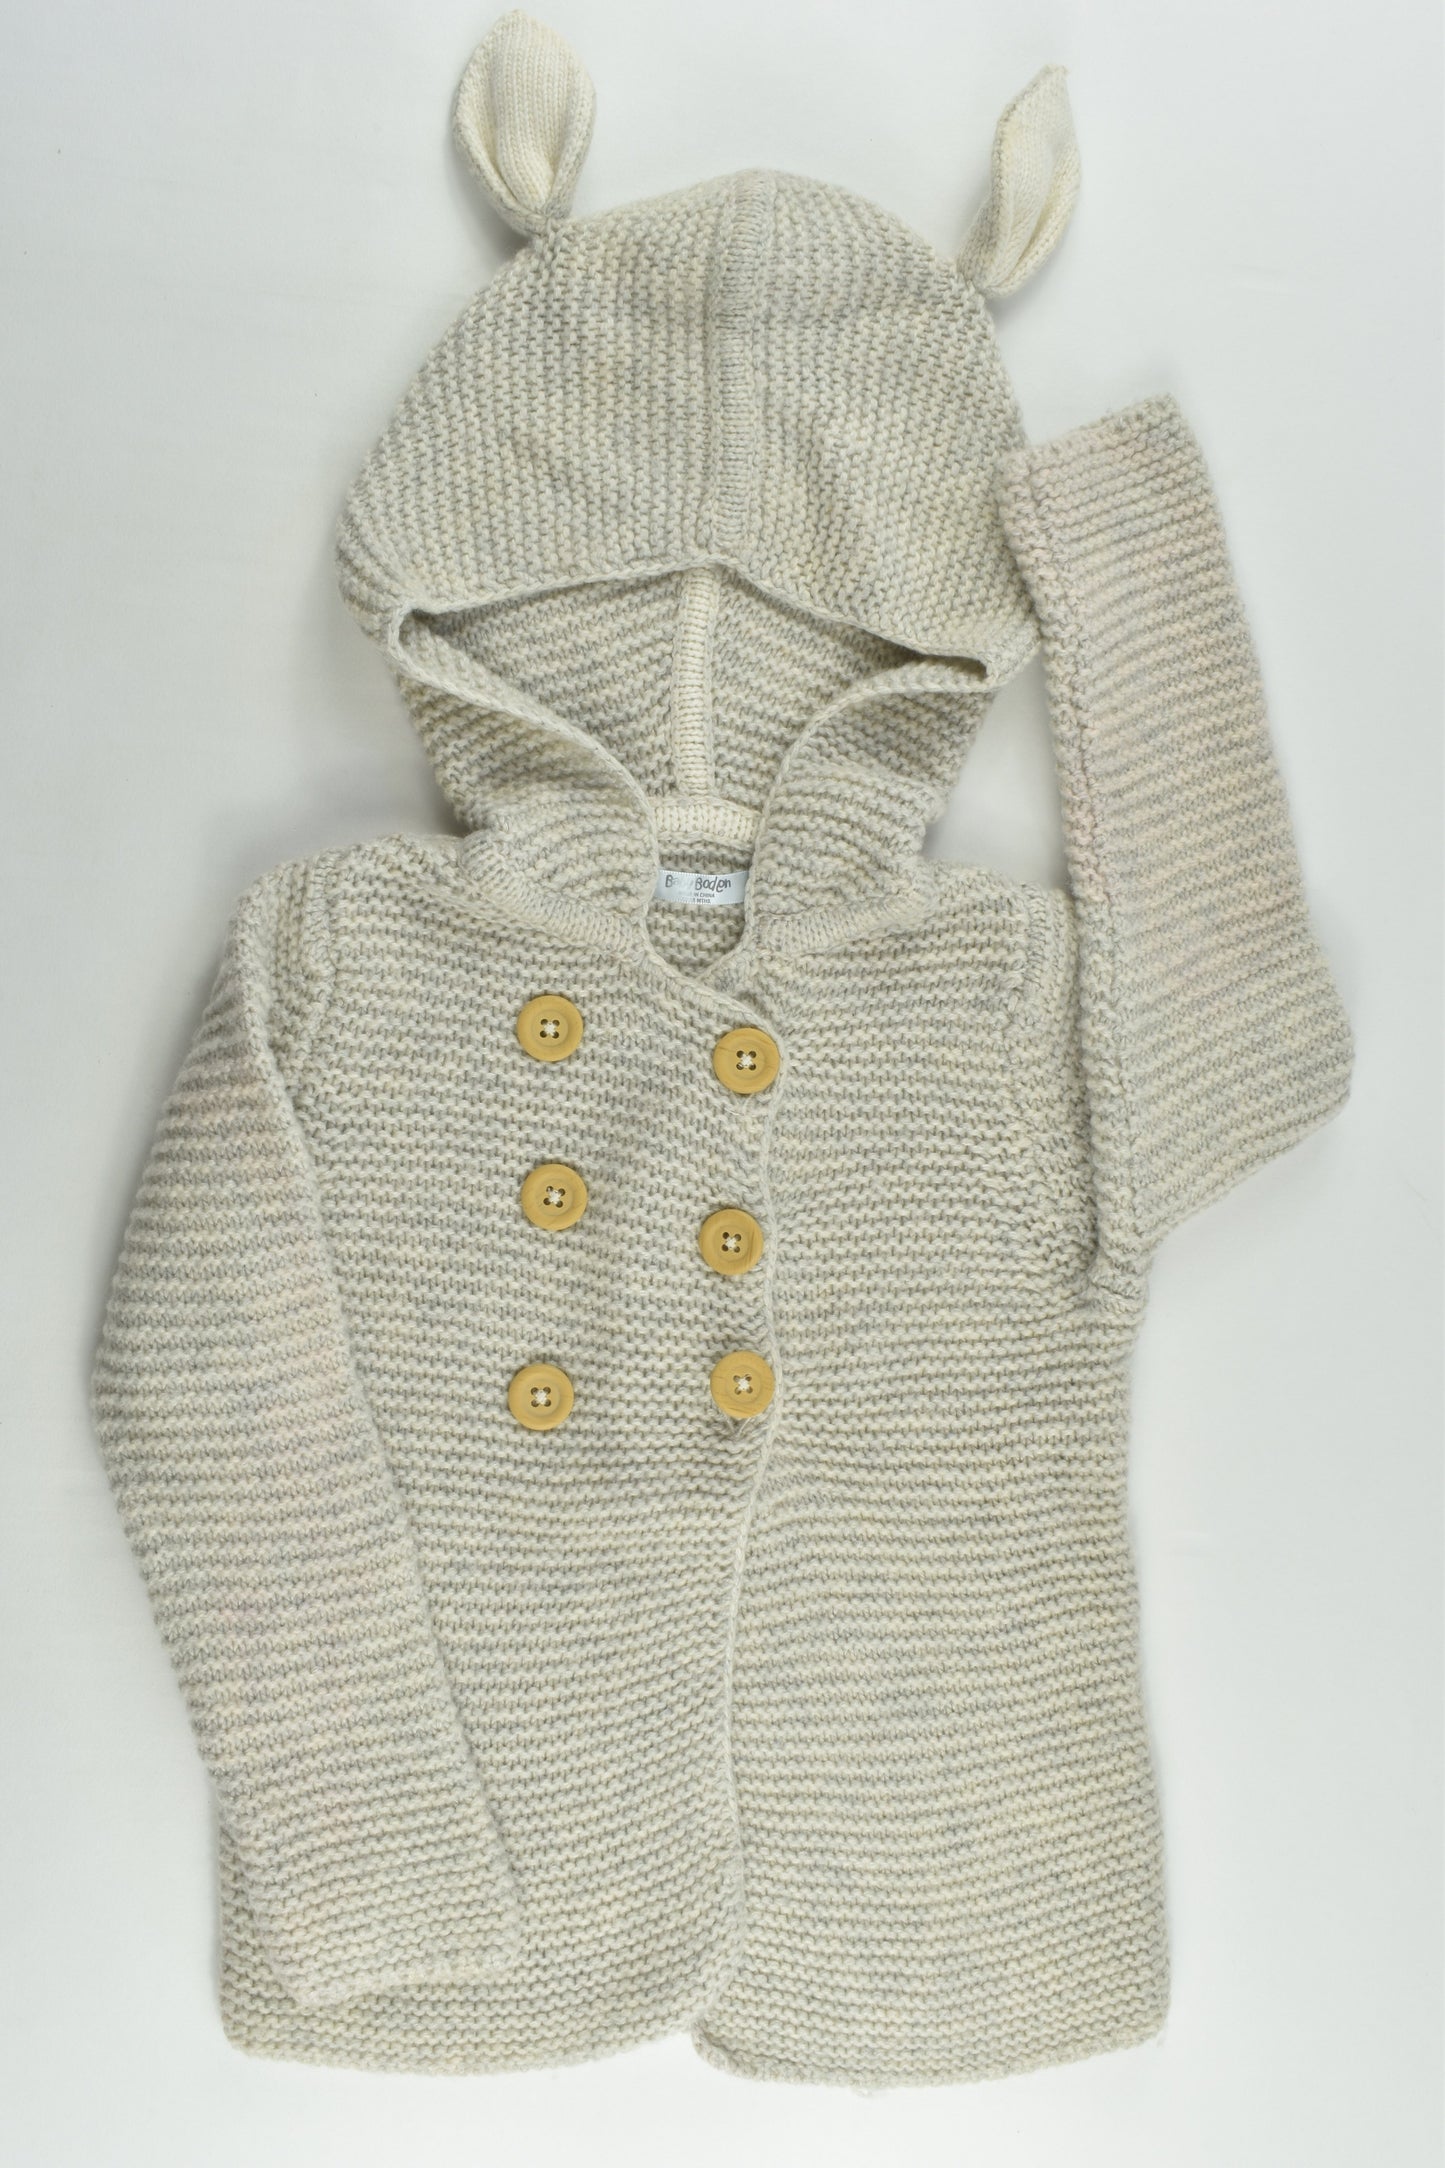 Baby Boden Size 1-2 Warm Hooded Knitted Cardigan